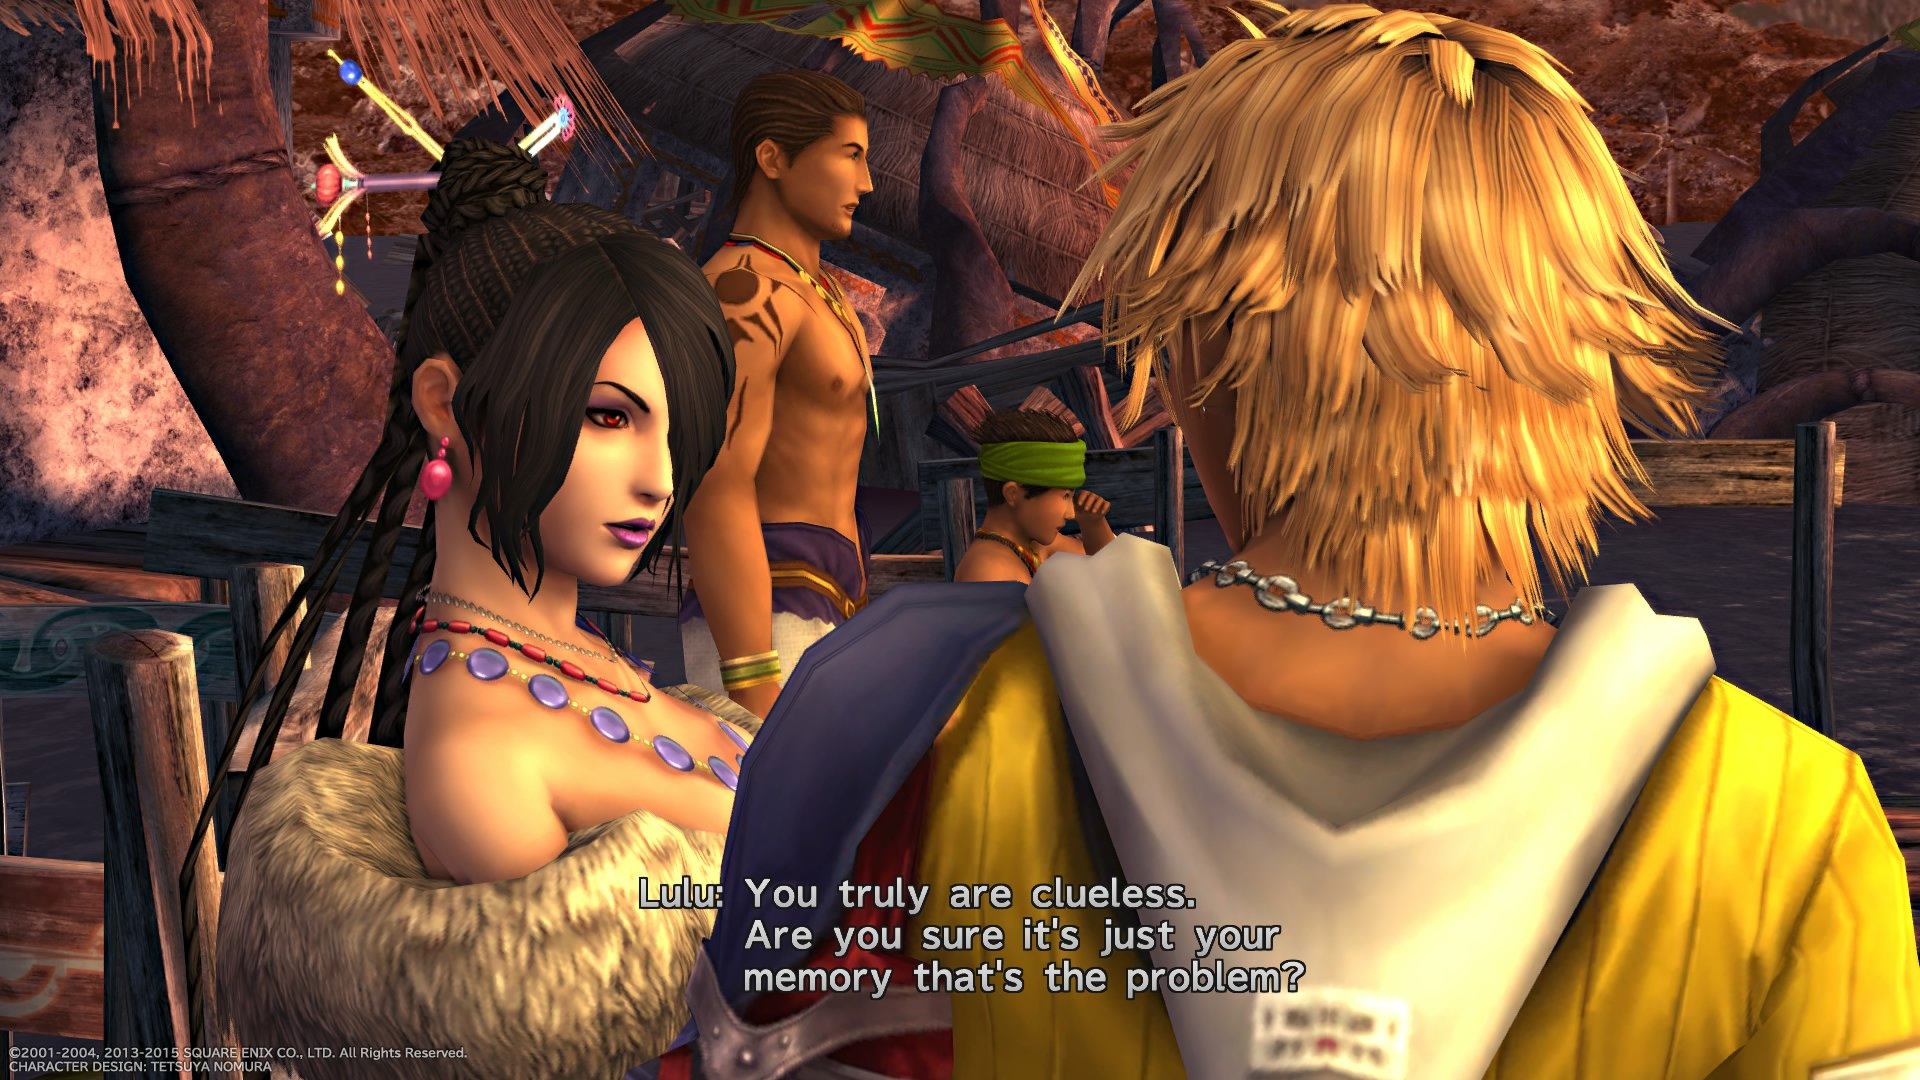 Final Fantasy X HD Remaster Review (PS4) - #MaybeinMarch - Witch's